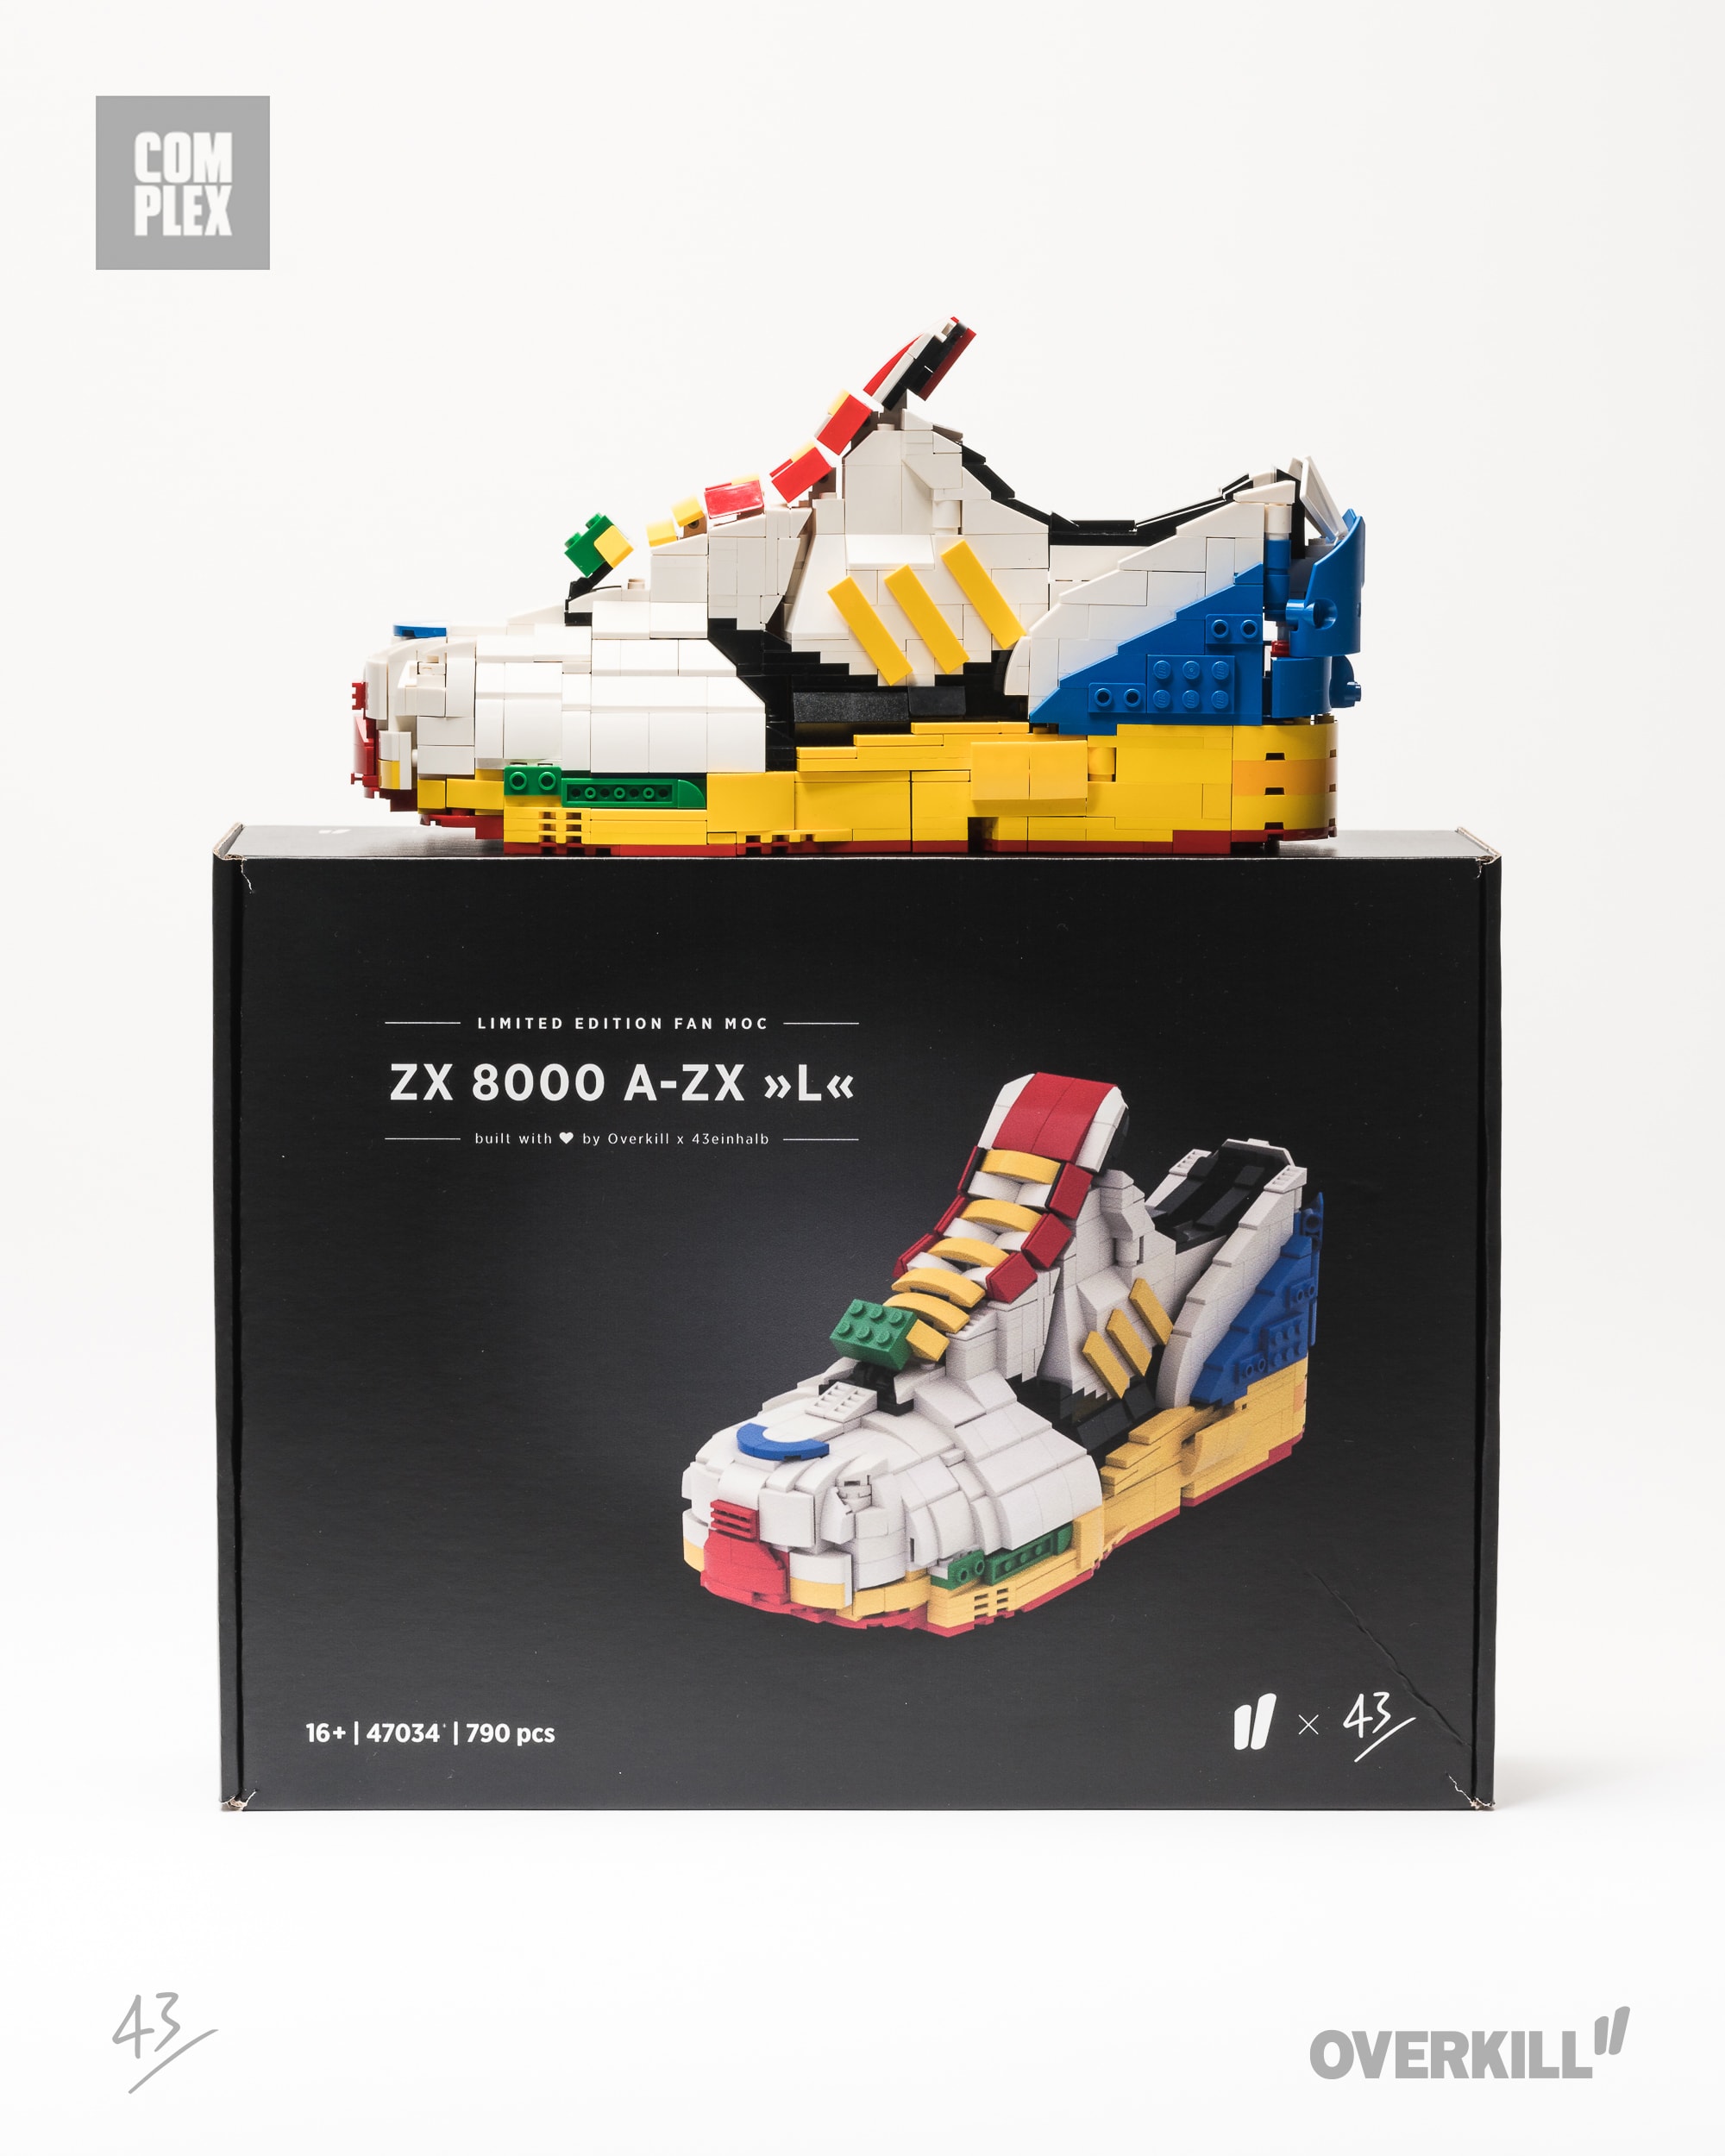 adidas and lego shoes